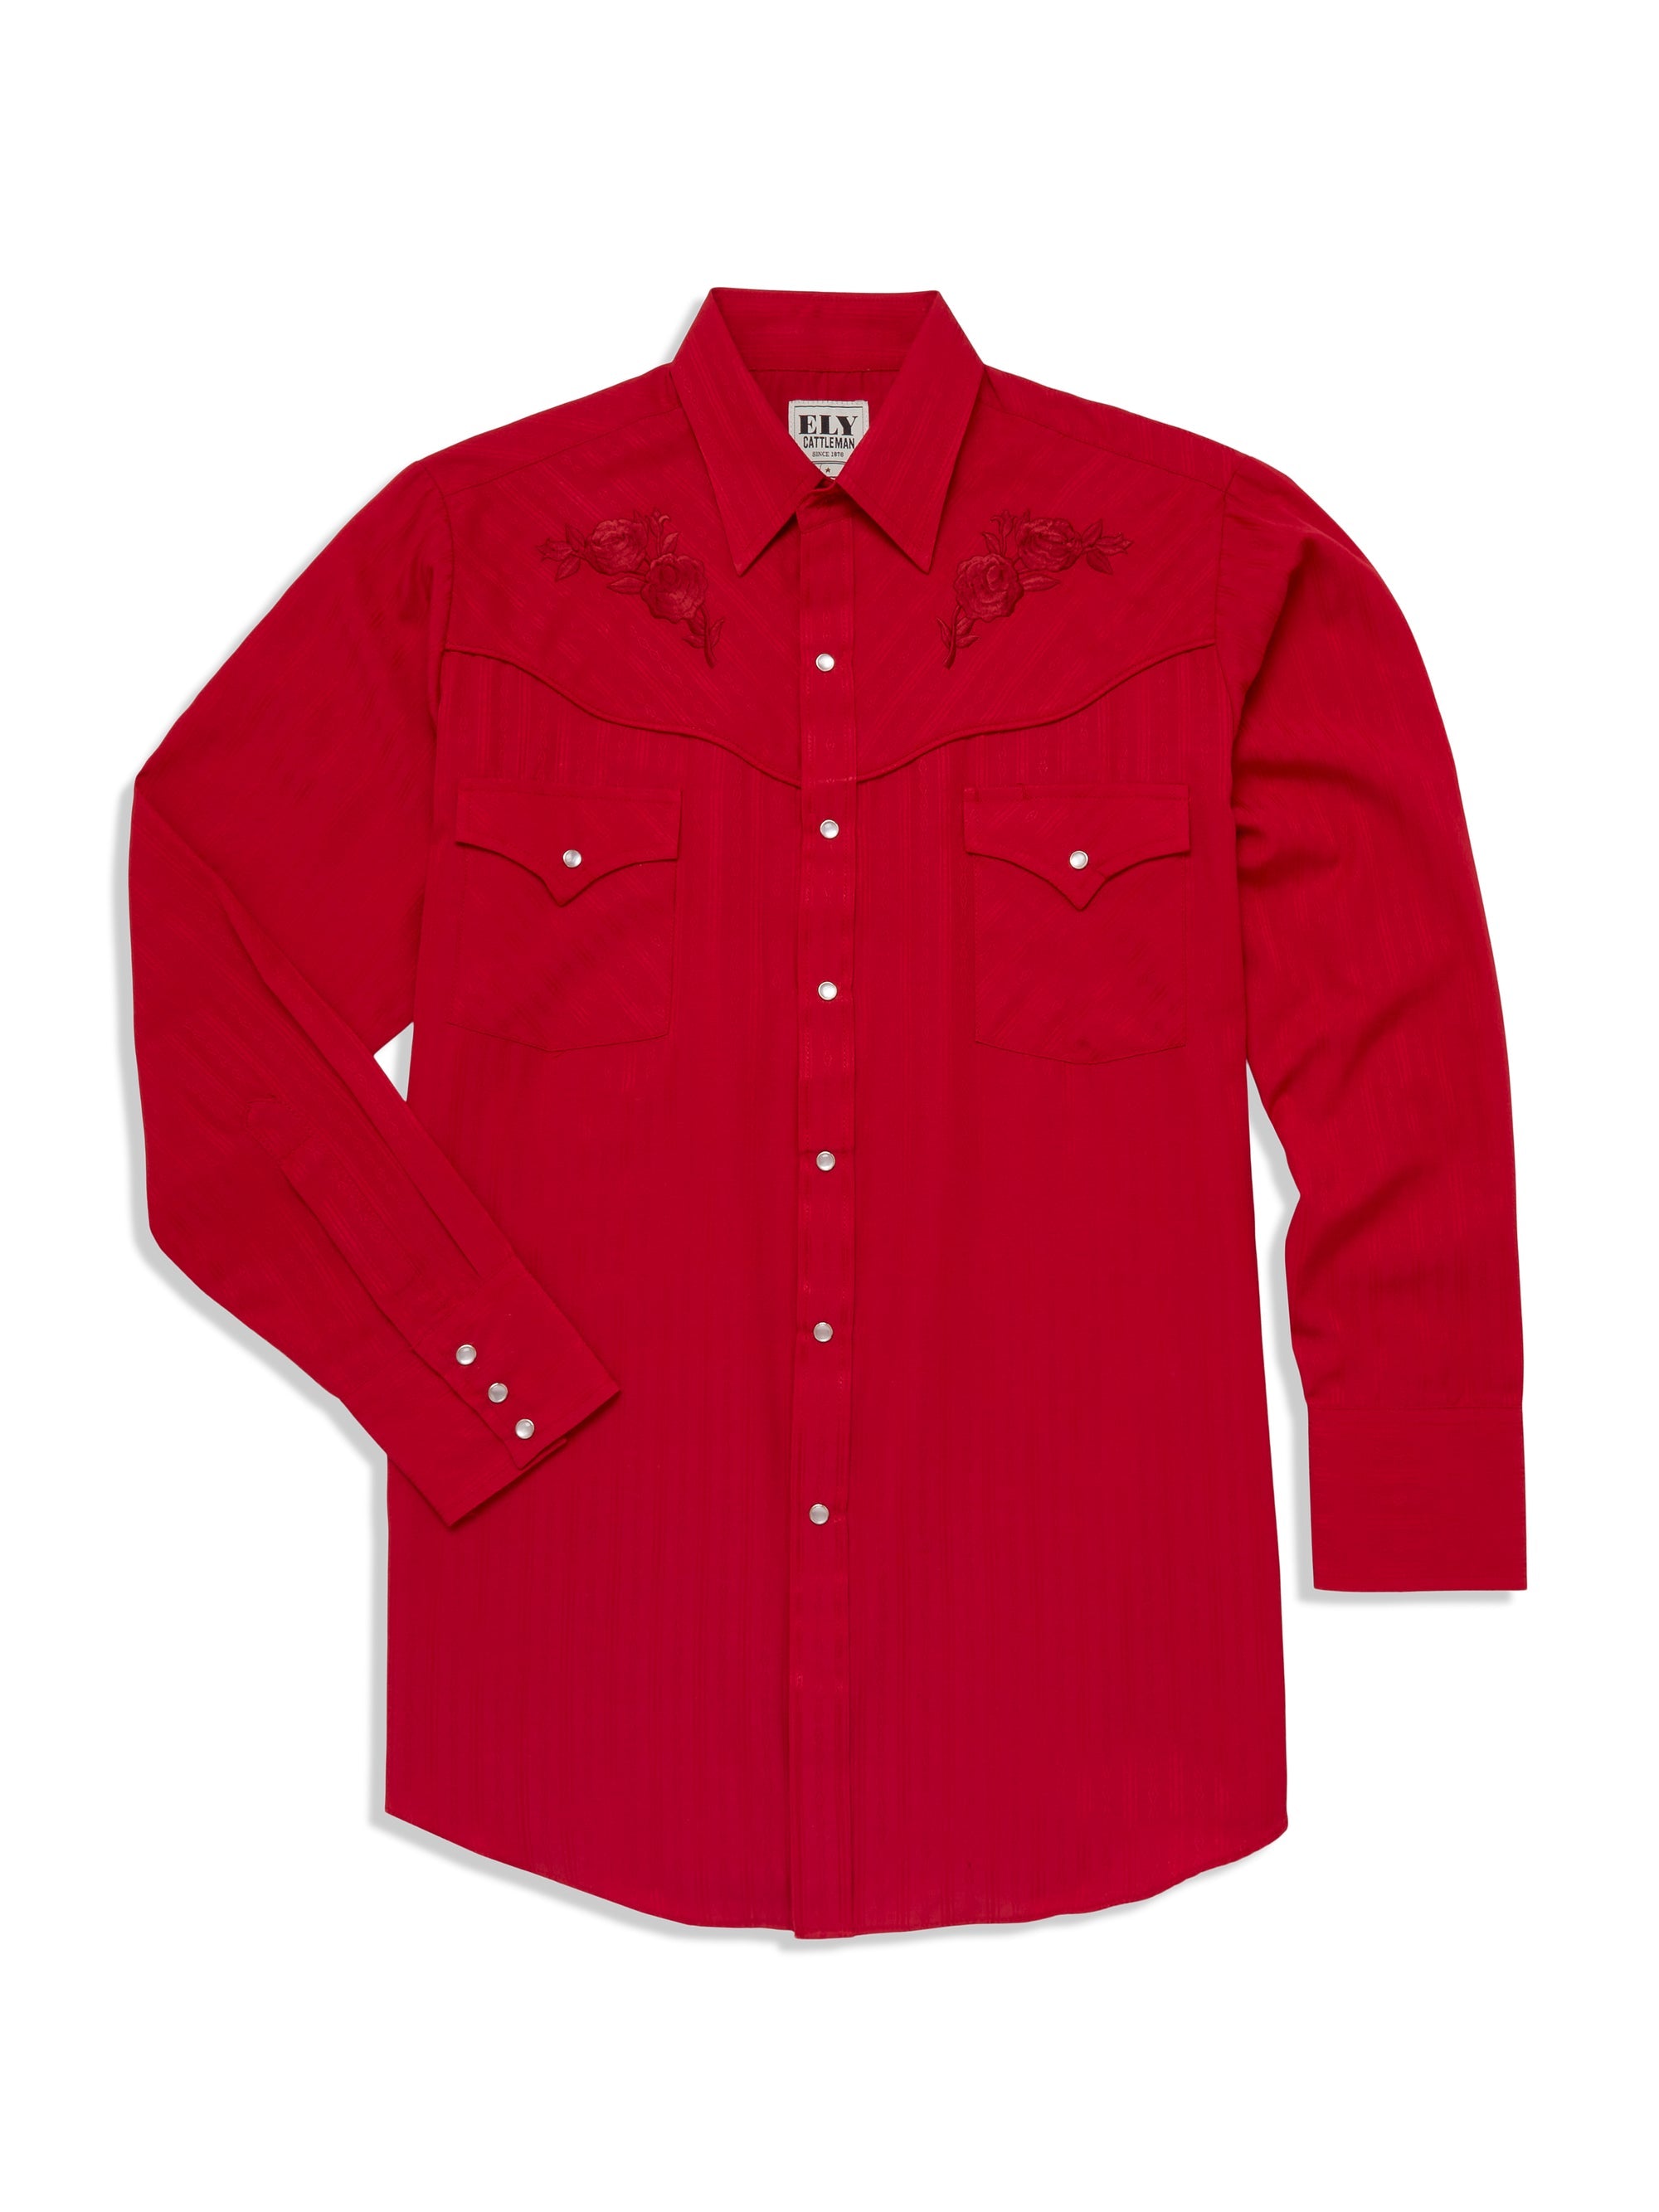 Men's Red Western Shirt w/ Embroidery